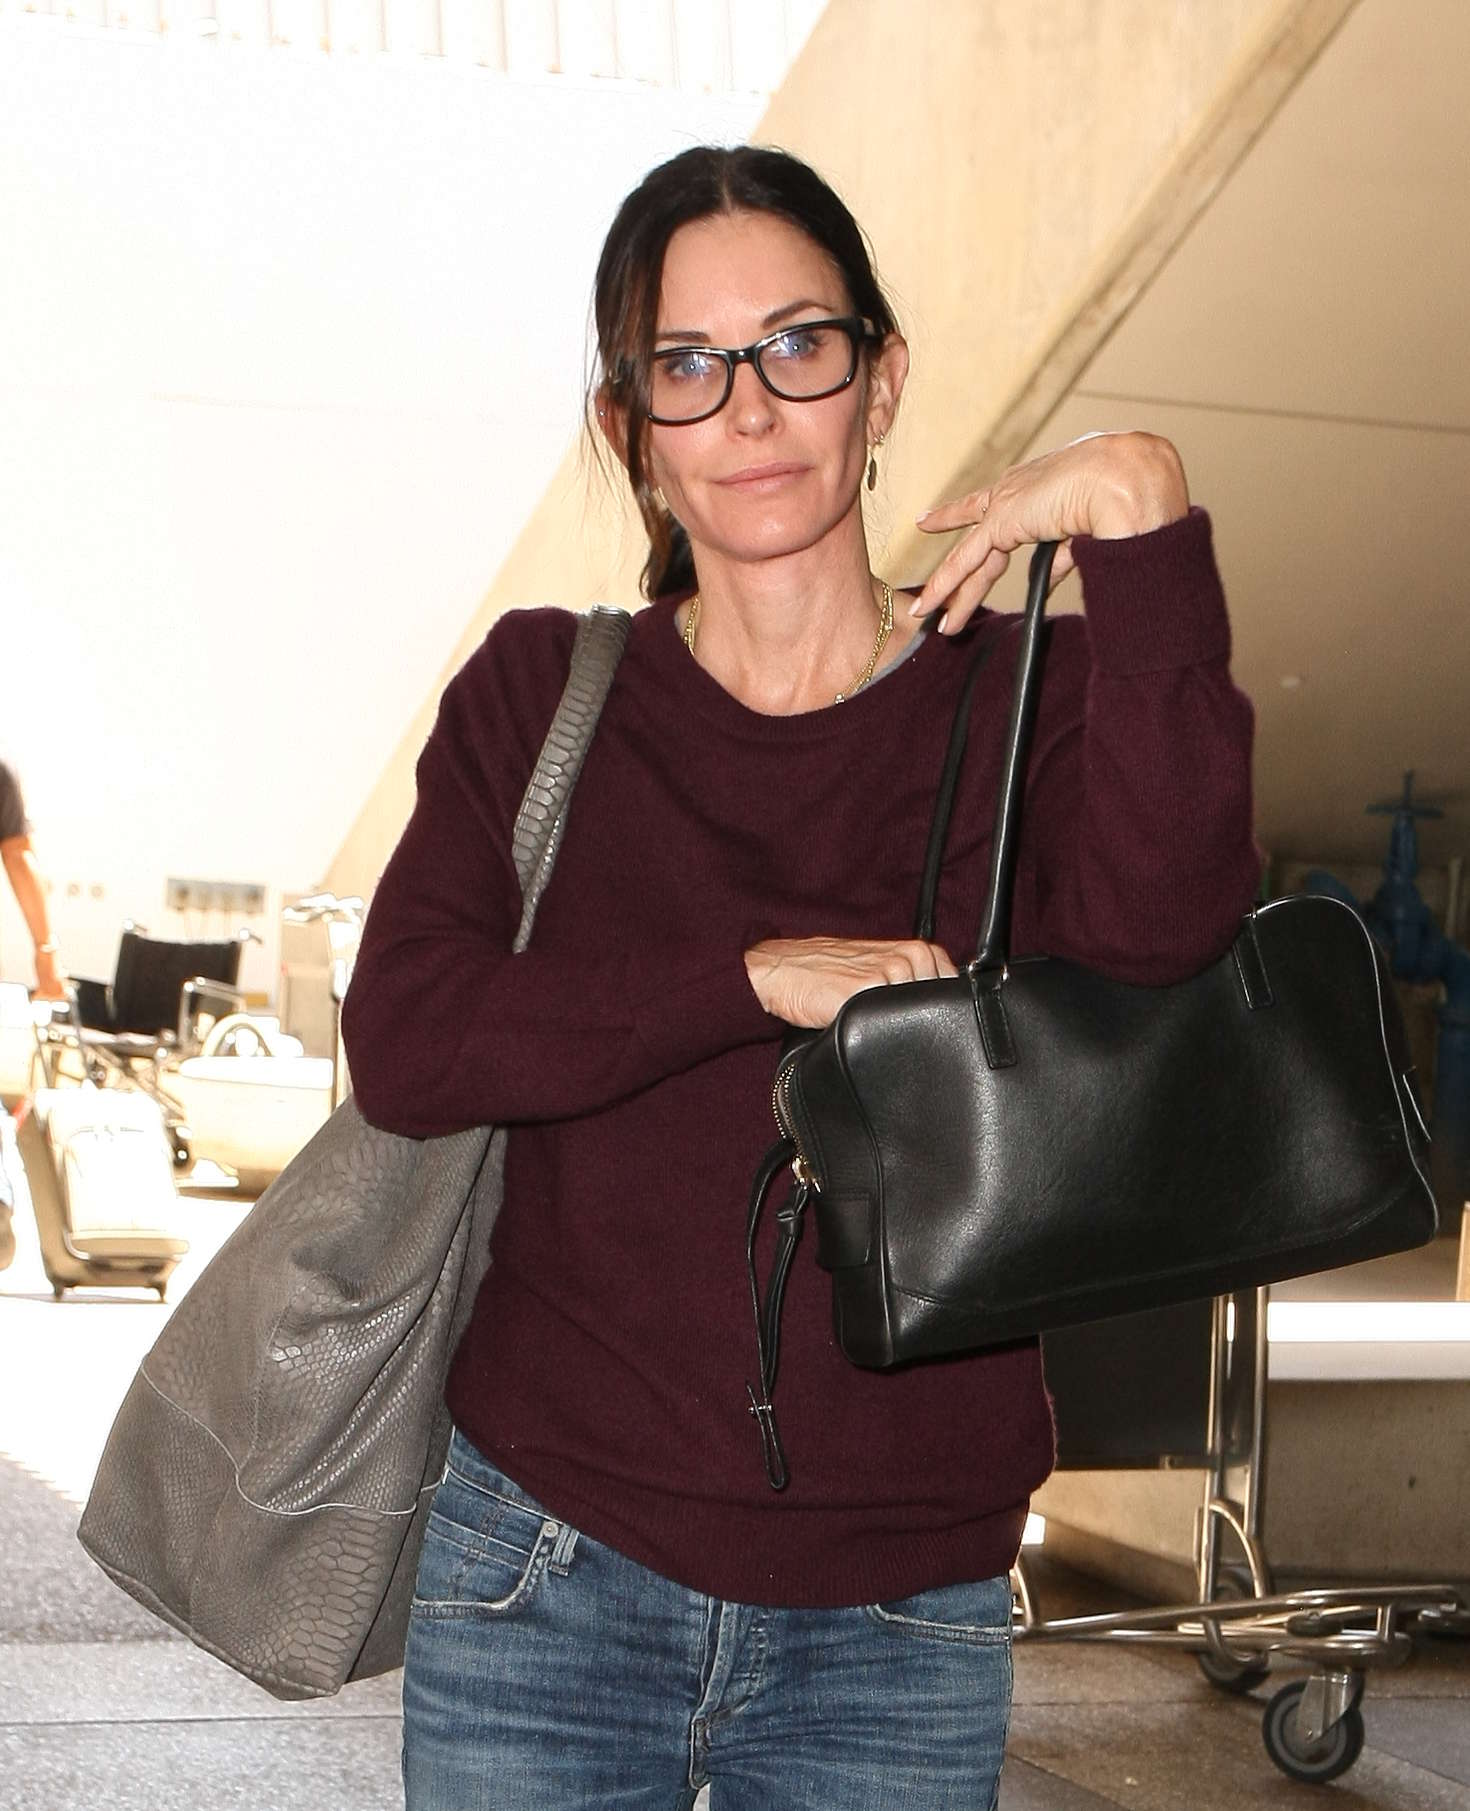 Courteney Cox 2016 : Courteney Cox in Jeans at Los Angeles International Airport -04